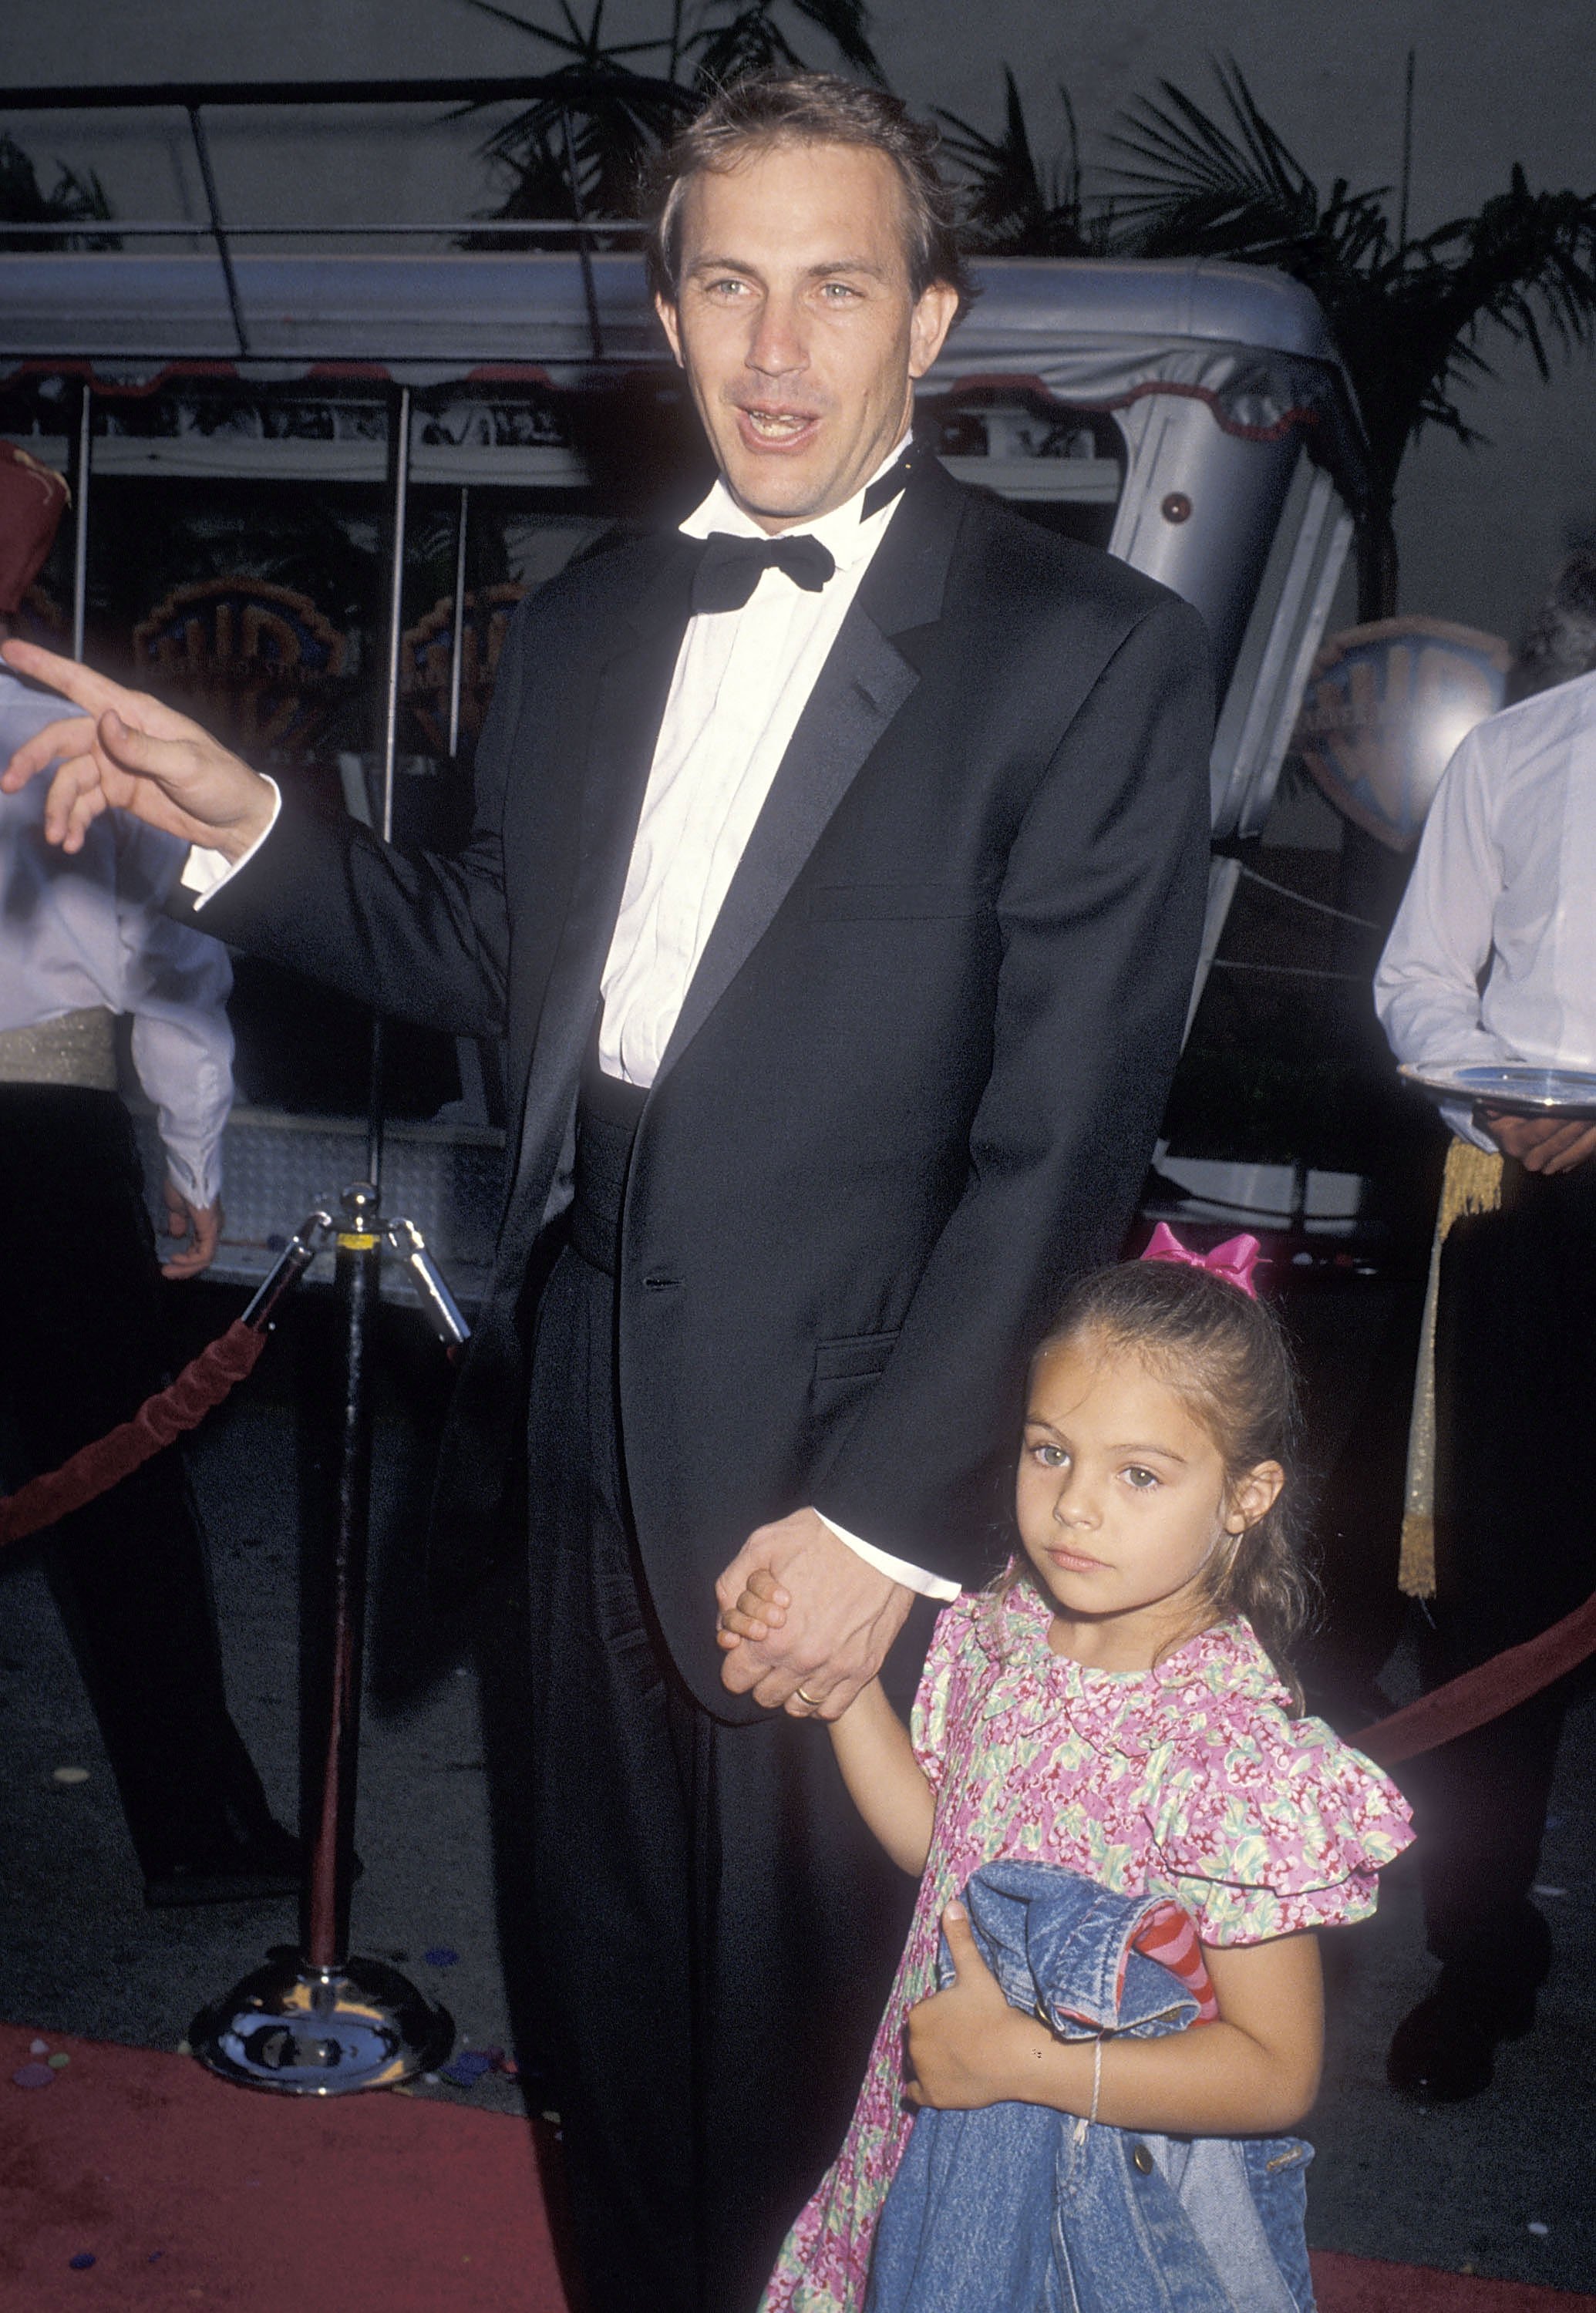 Kevin Costner and his daughter Annie Costner at Warner Bros. Hosts a "Celebration of Tradition" Gala on June 2, 1990, in Burbank, California | Source: Getty Images